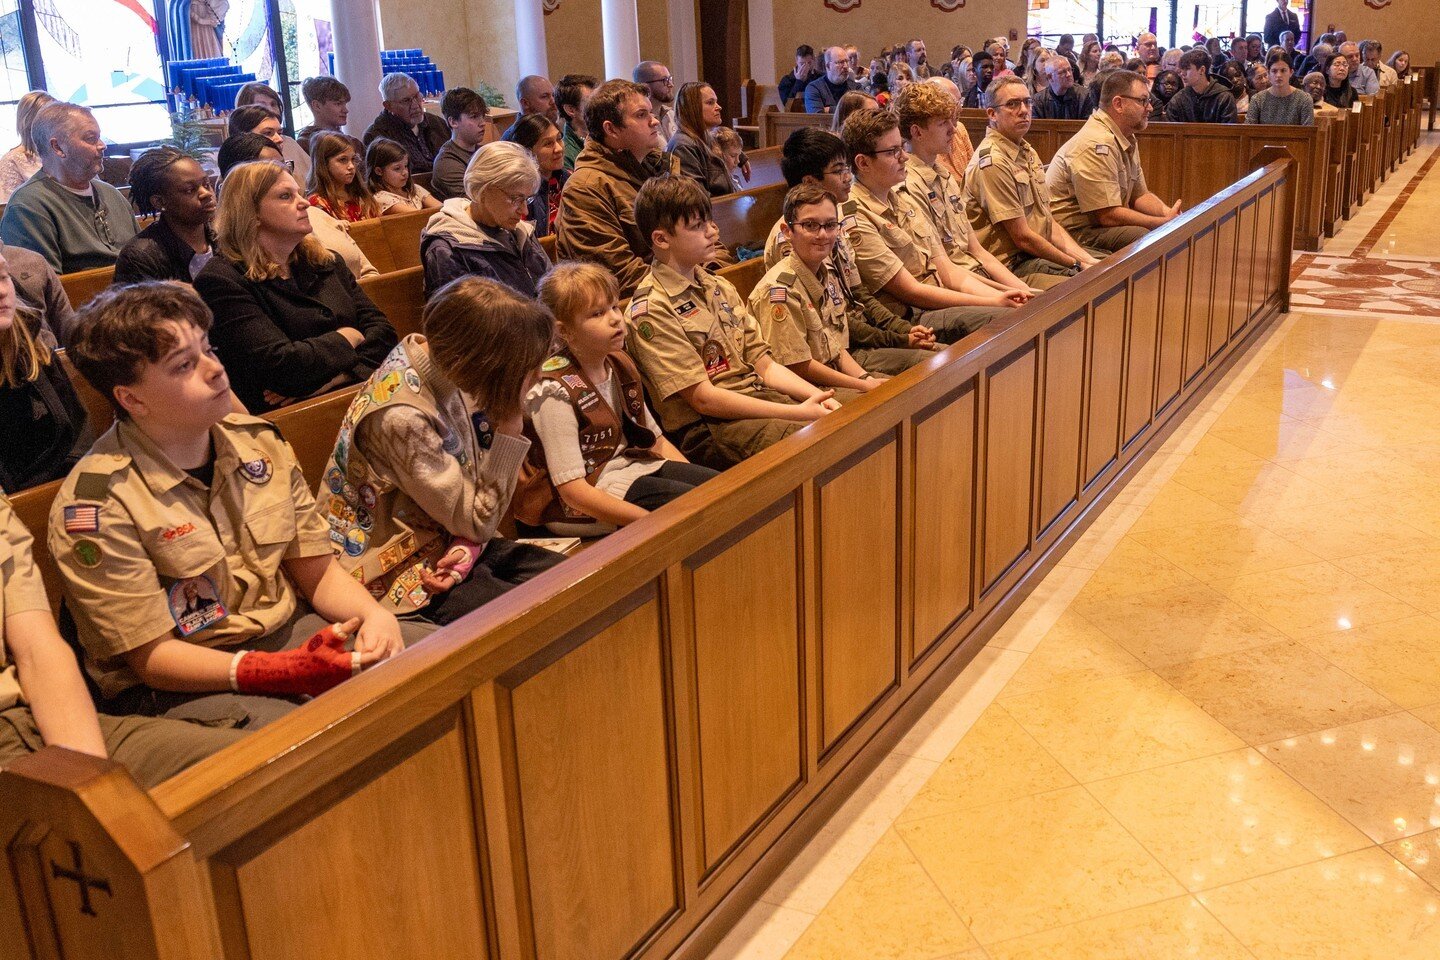 Congratulations to our Boy Scouts and Girl Scouts who were recently recognized for their continual growth in faith and service on Scout Sunday.